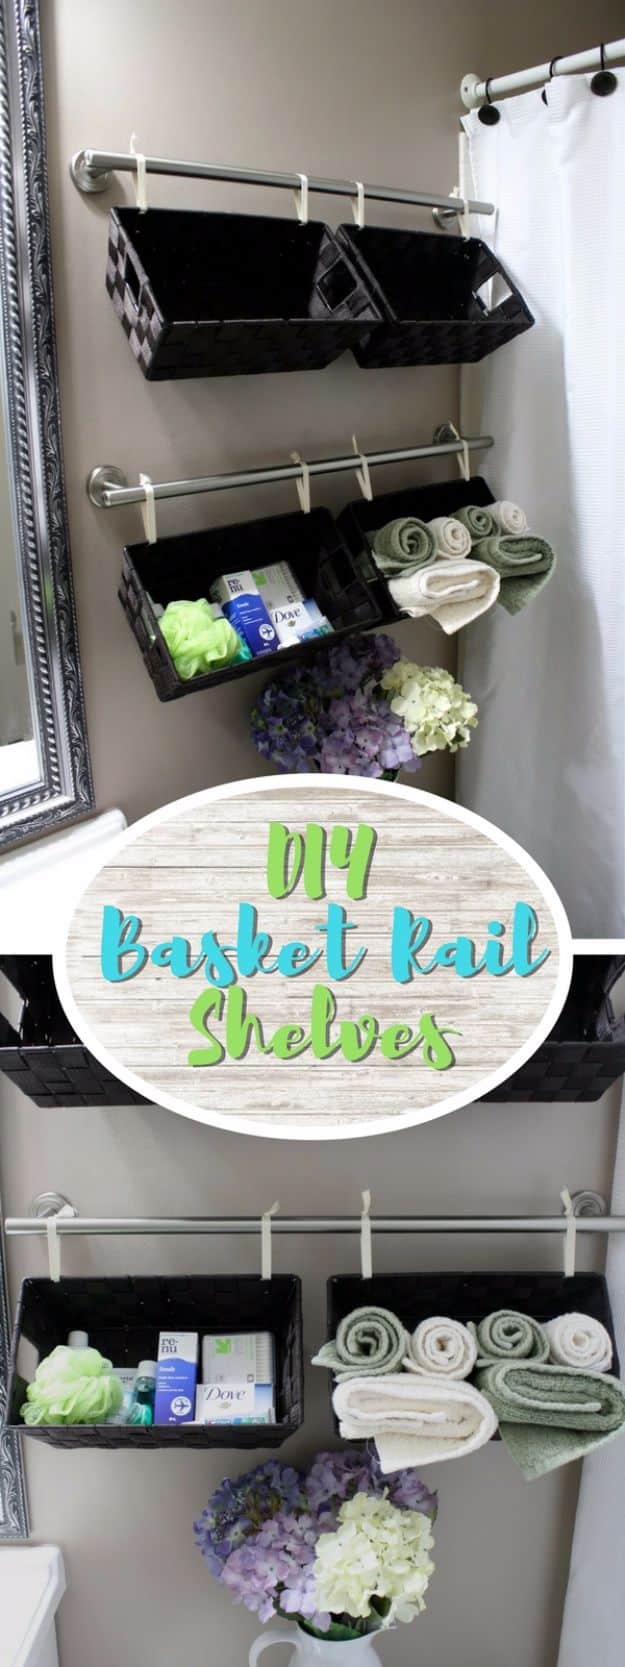 DIY Bathroom Storage Ideas - Basket Rail Shelves - Best Solutions for Under Sink Organization, Countertop Jars and Boxes, Counter Caddy With Mason Jars, Over Toilet Ideas and Shelves, Easy Tips and Tricks for Small Spaces To Organize Bath Products #storageideas #diybathroom #bathroomdecor